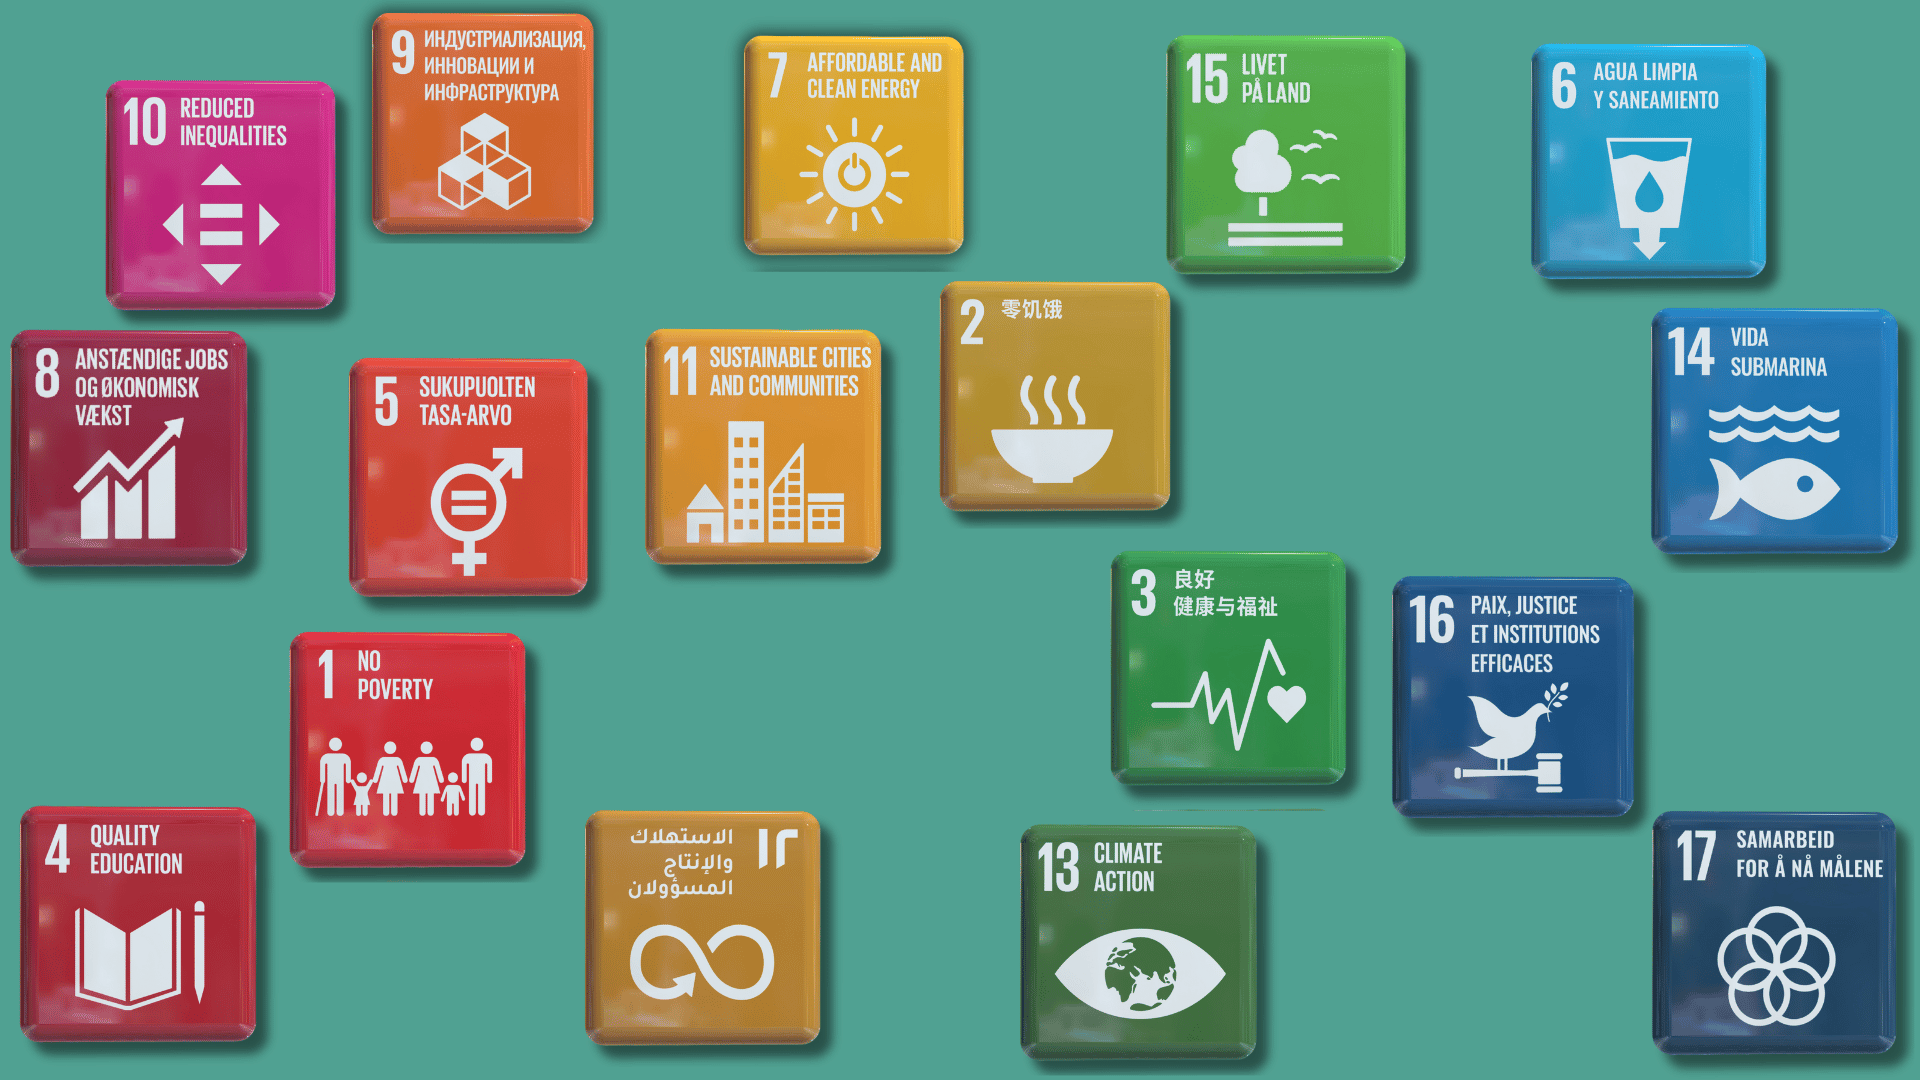 Corporate contributions to United Nations’ Sustainable Development Goals